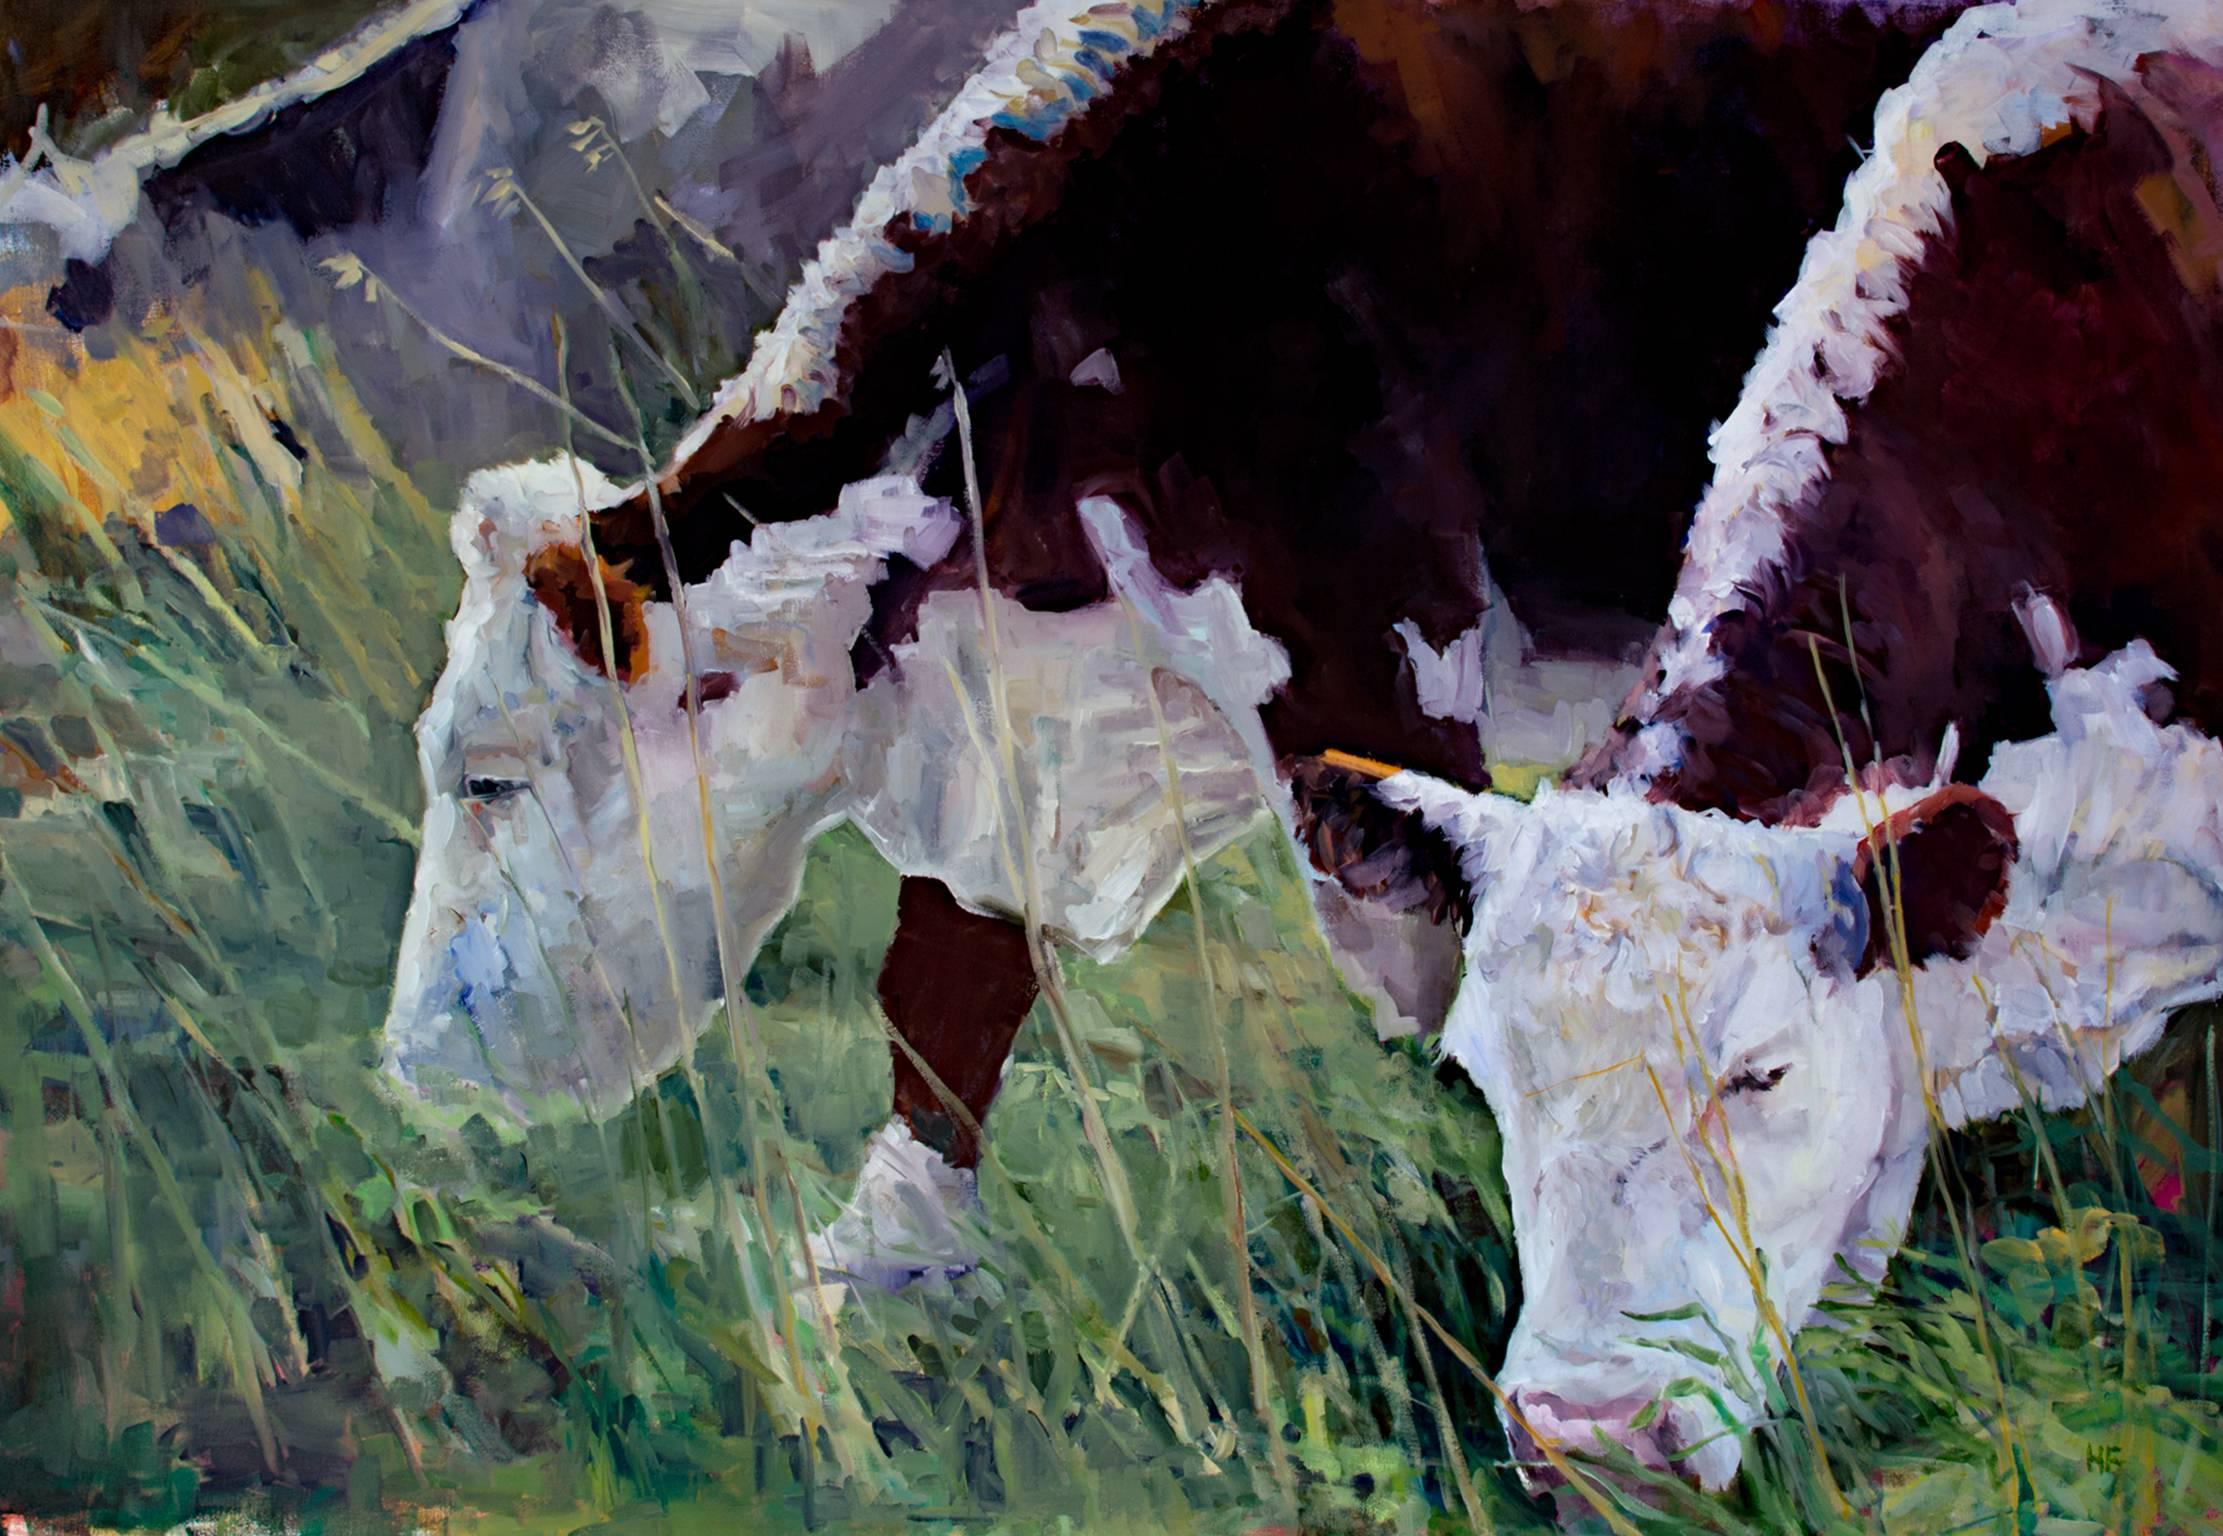 "Grazing," Oil on Canvas signed by Heather Foster